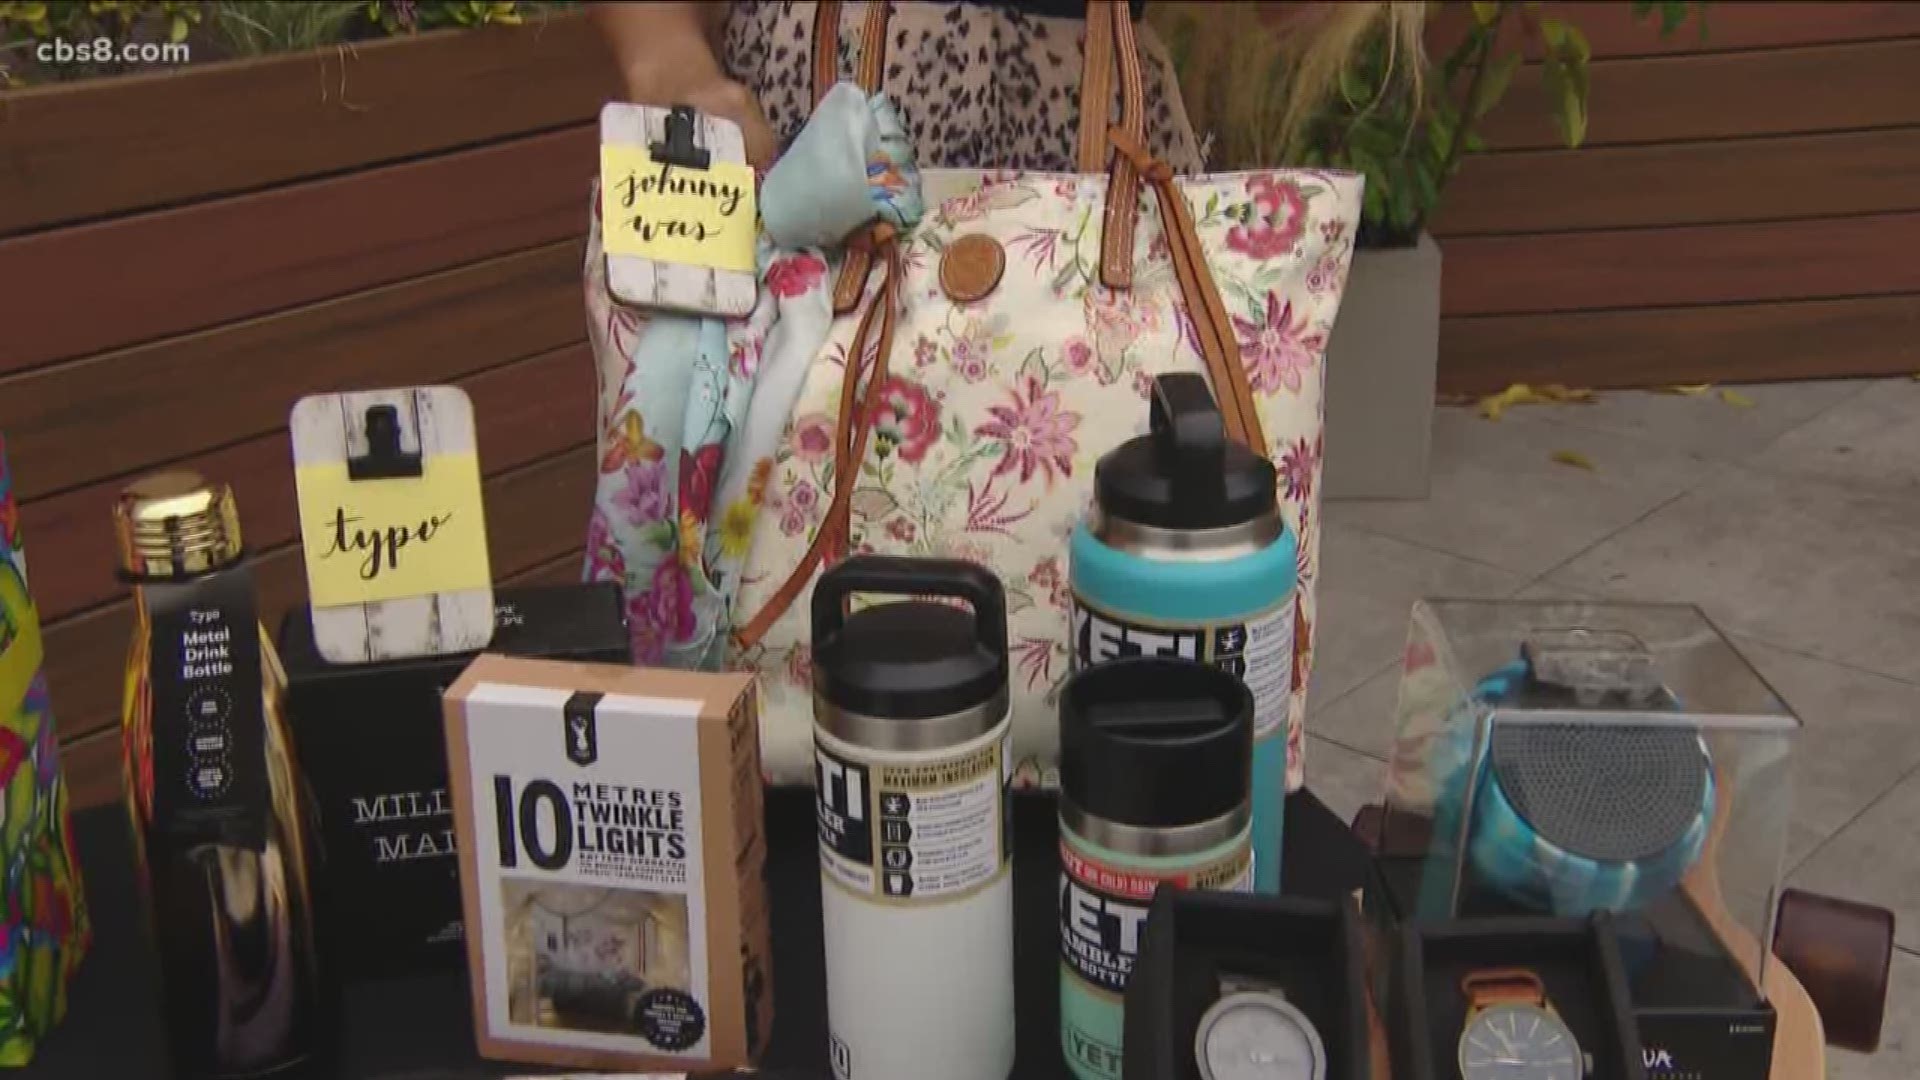 Arianne Cousin from Fashion Valley brought in some great gift ideas for people of any budget size.